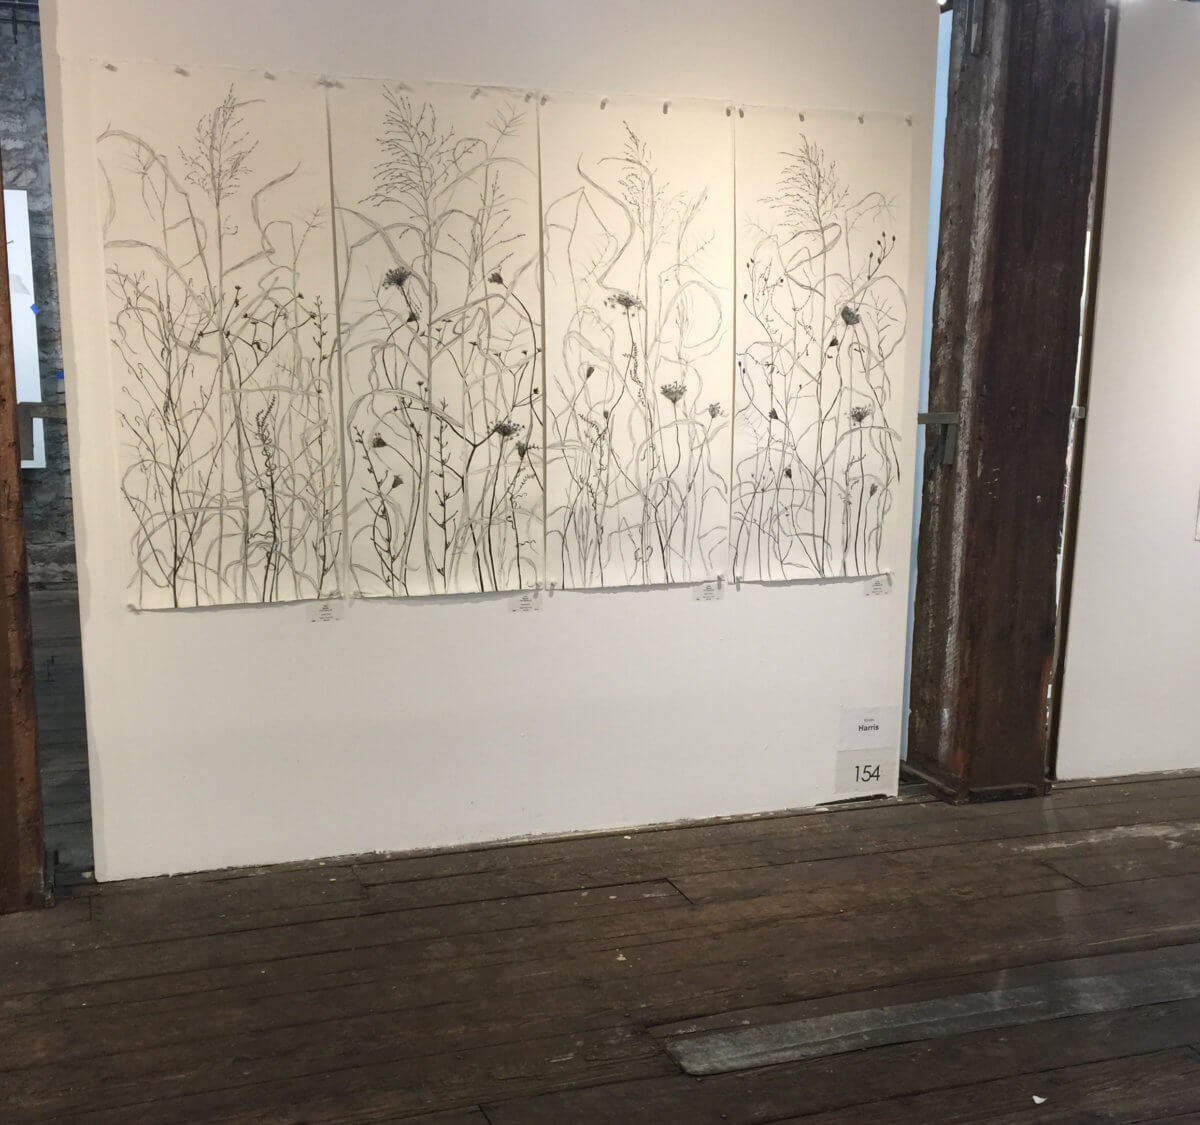 ARTISTS REFLECT ON HEALING AND NATURE IN NEW WHITMAN-INSPIRED RED HOOK EXHIBIT